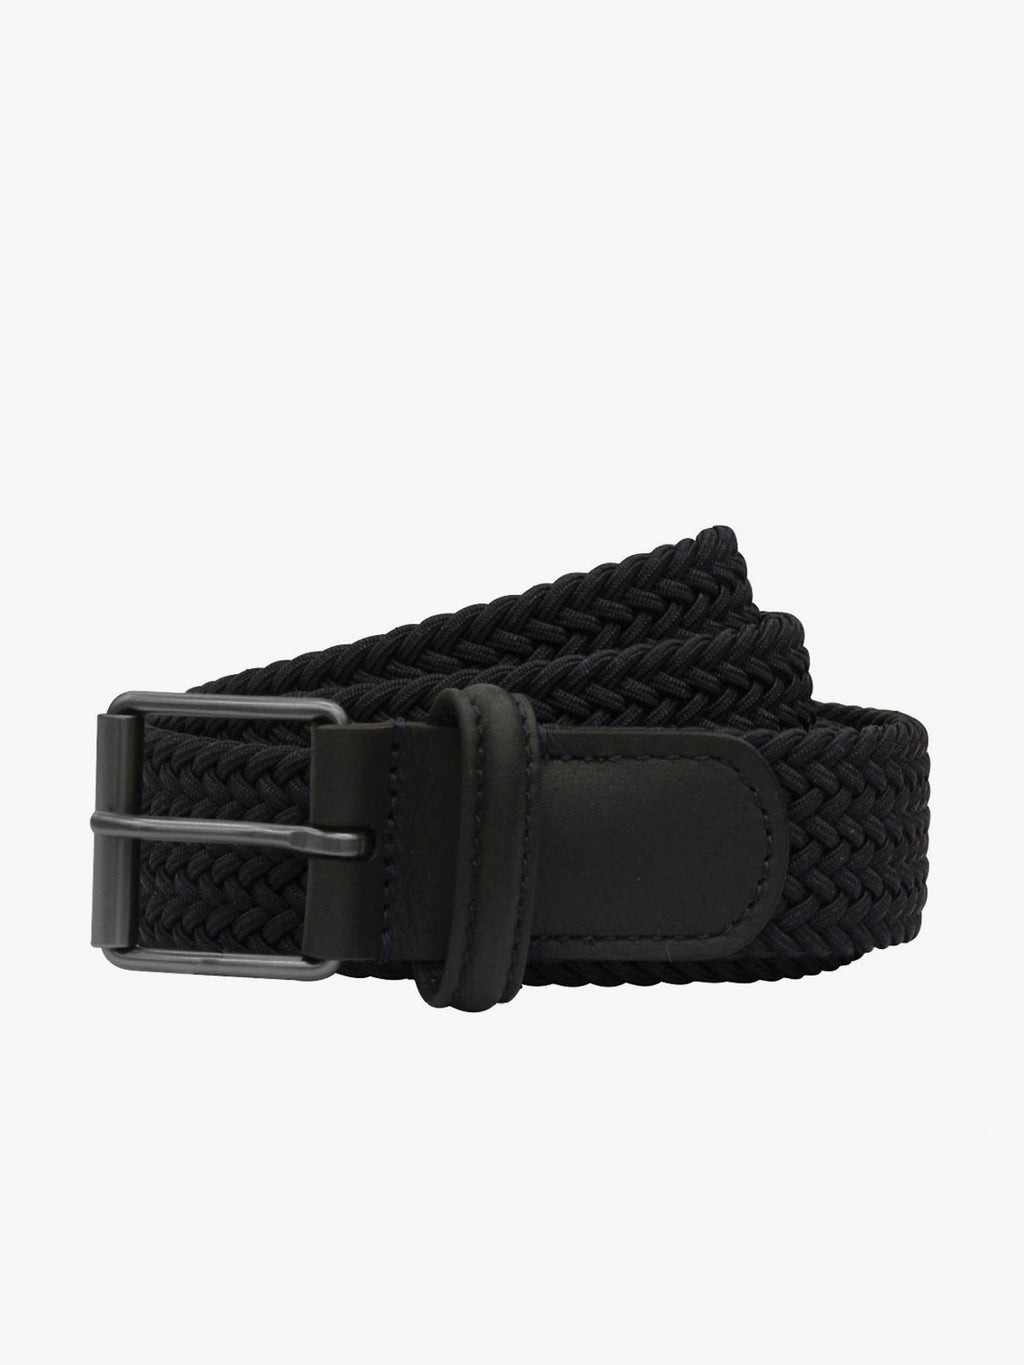 Anderson's Leather-Trimmed Woven Belt Navy Blue | A